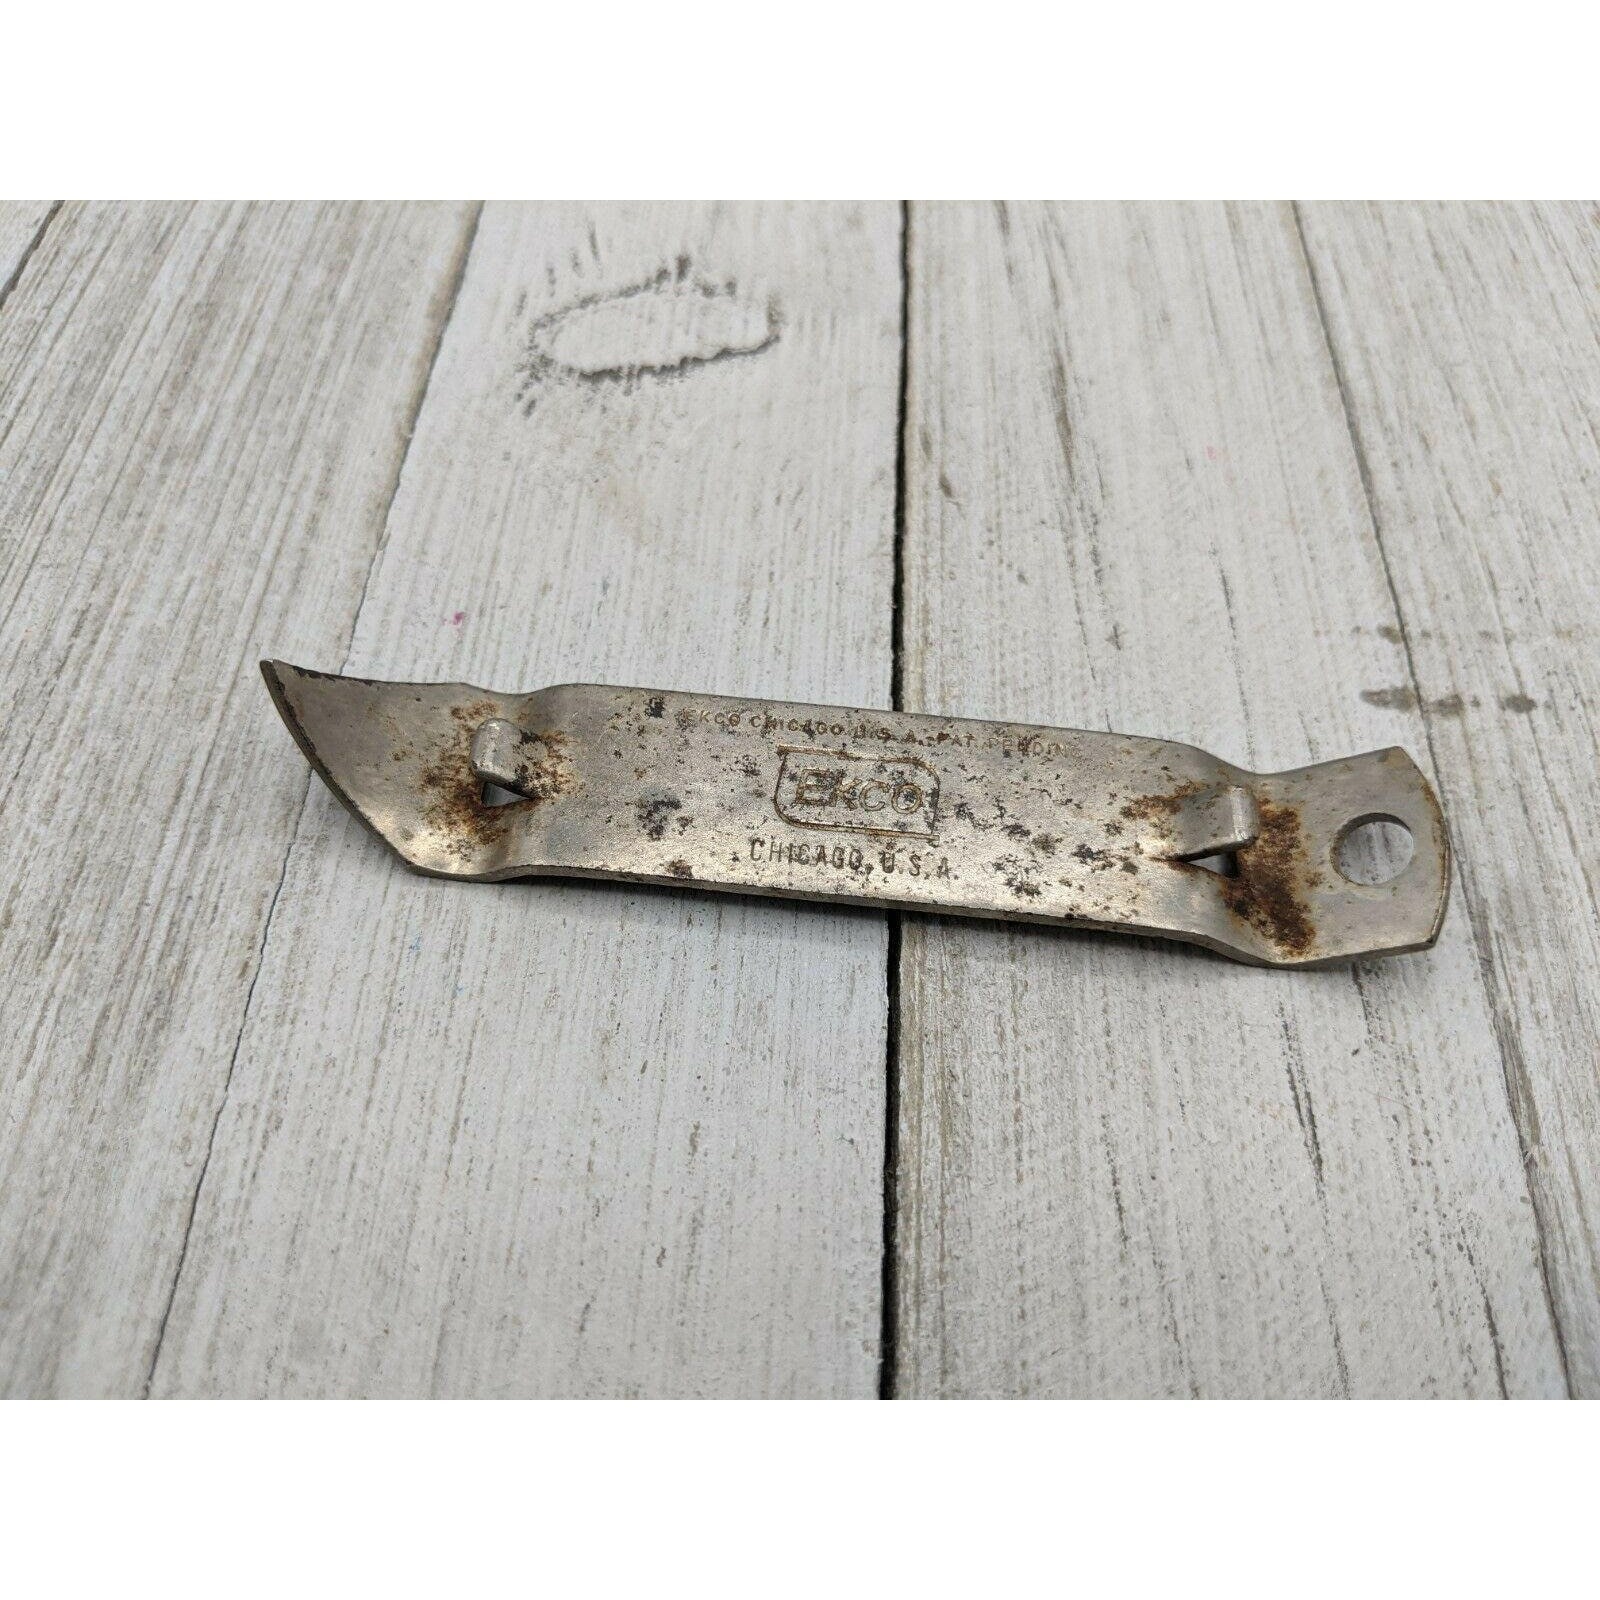 Ekco Miracle Roll No 881 Miniature Compact Can Bottle Opener 